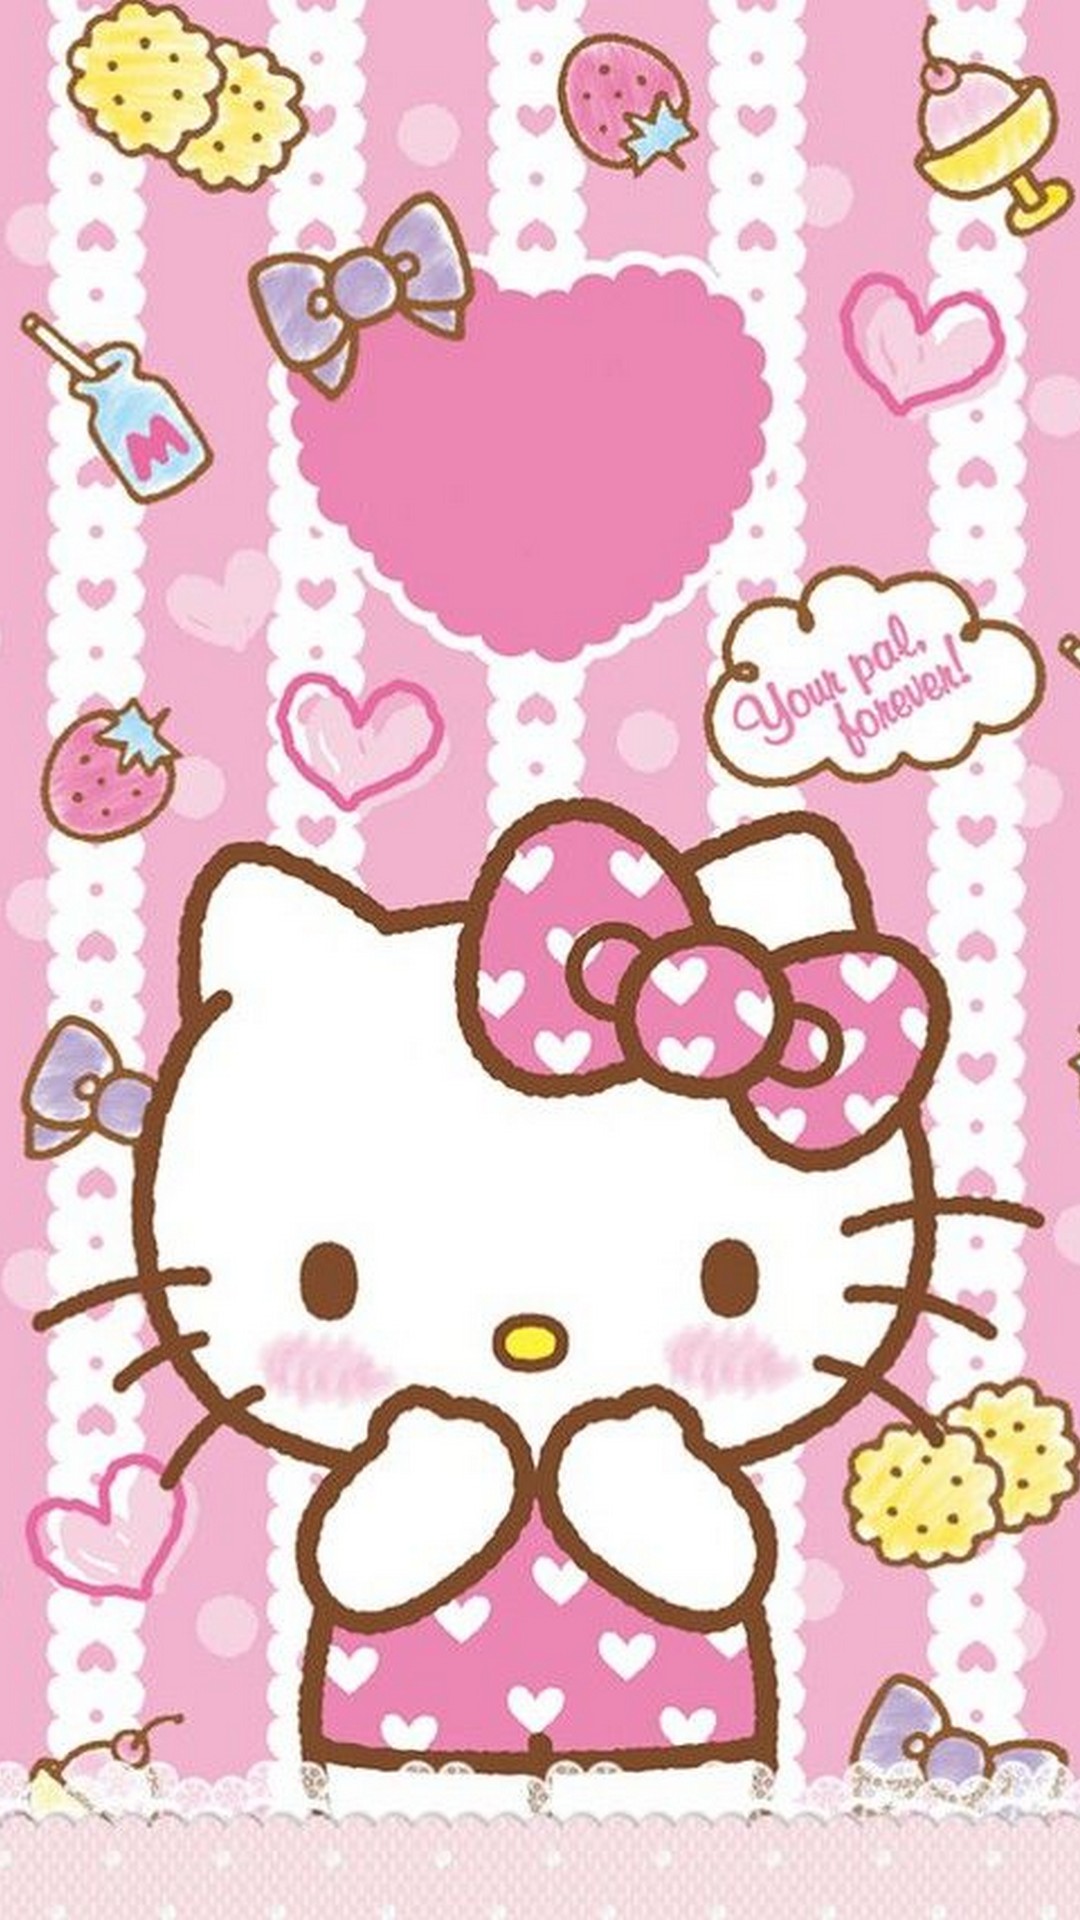 Hello Kitty Characters Wallpaper For Android with resolution 1080X1920 pixel. You can make this wallpaper for your Android backgrounds, Tablet, Smartphones Screensavers and Mobile Phone Lock Screen